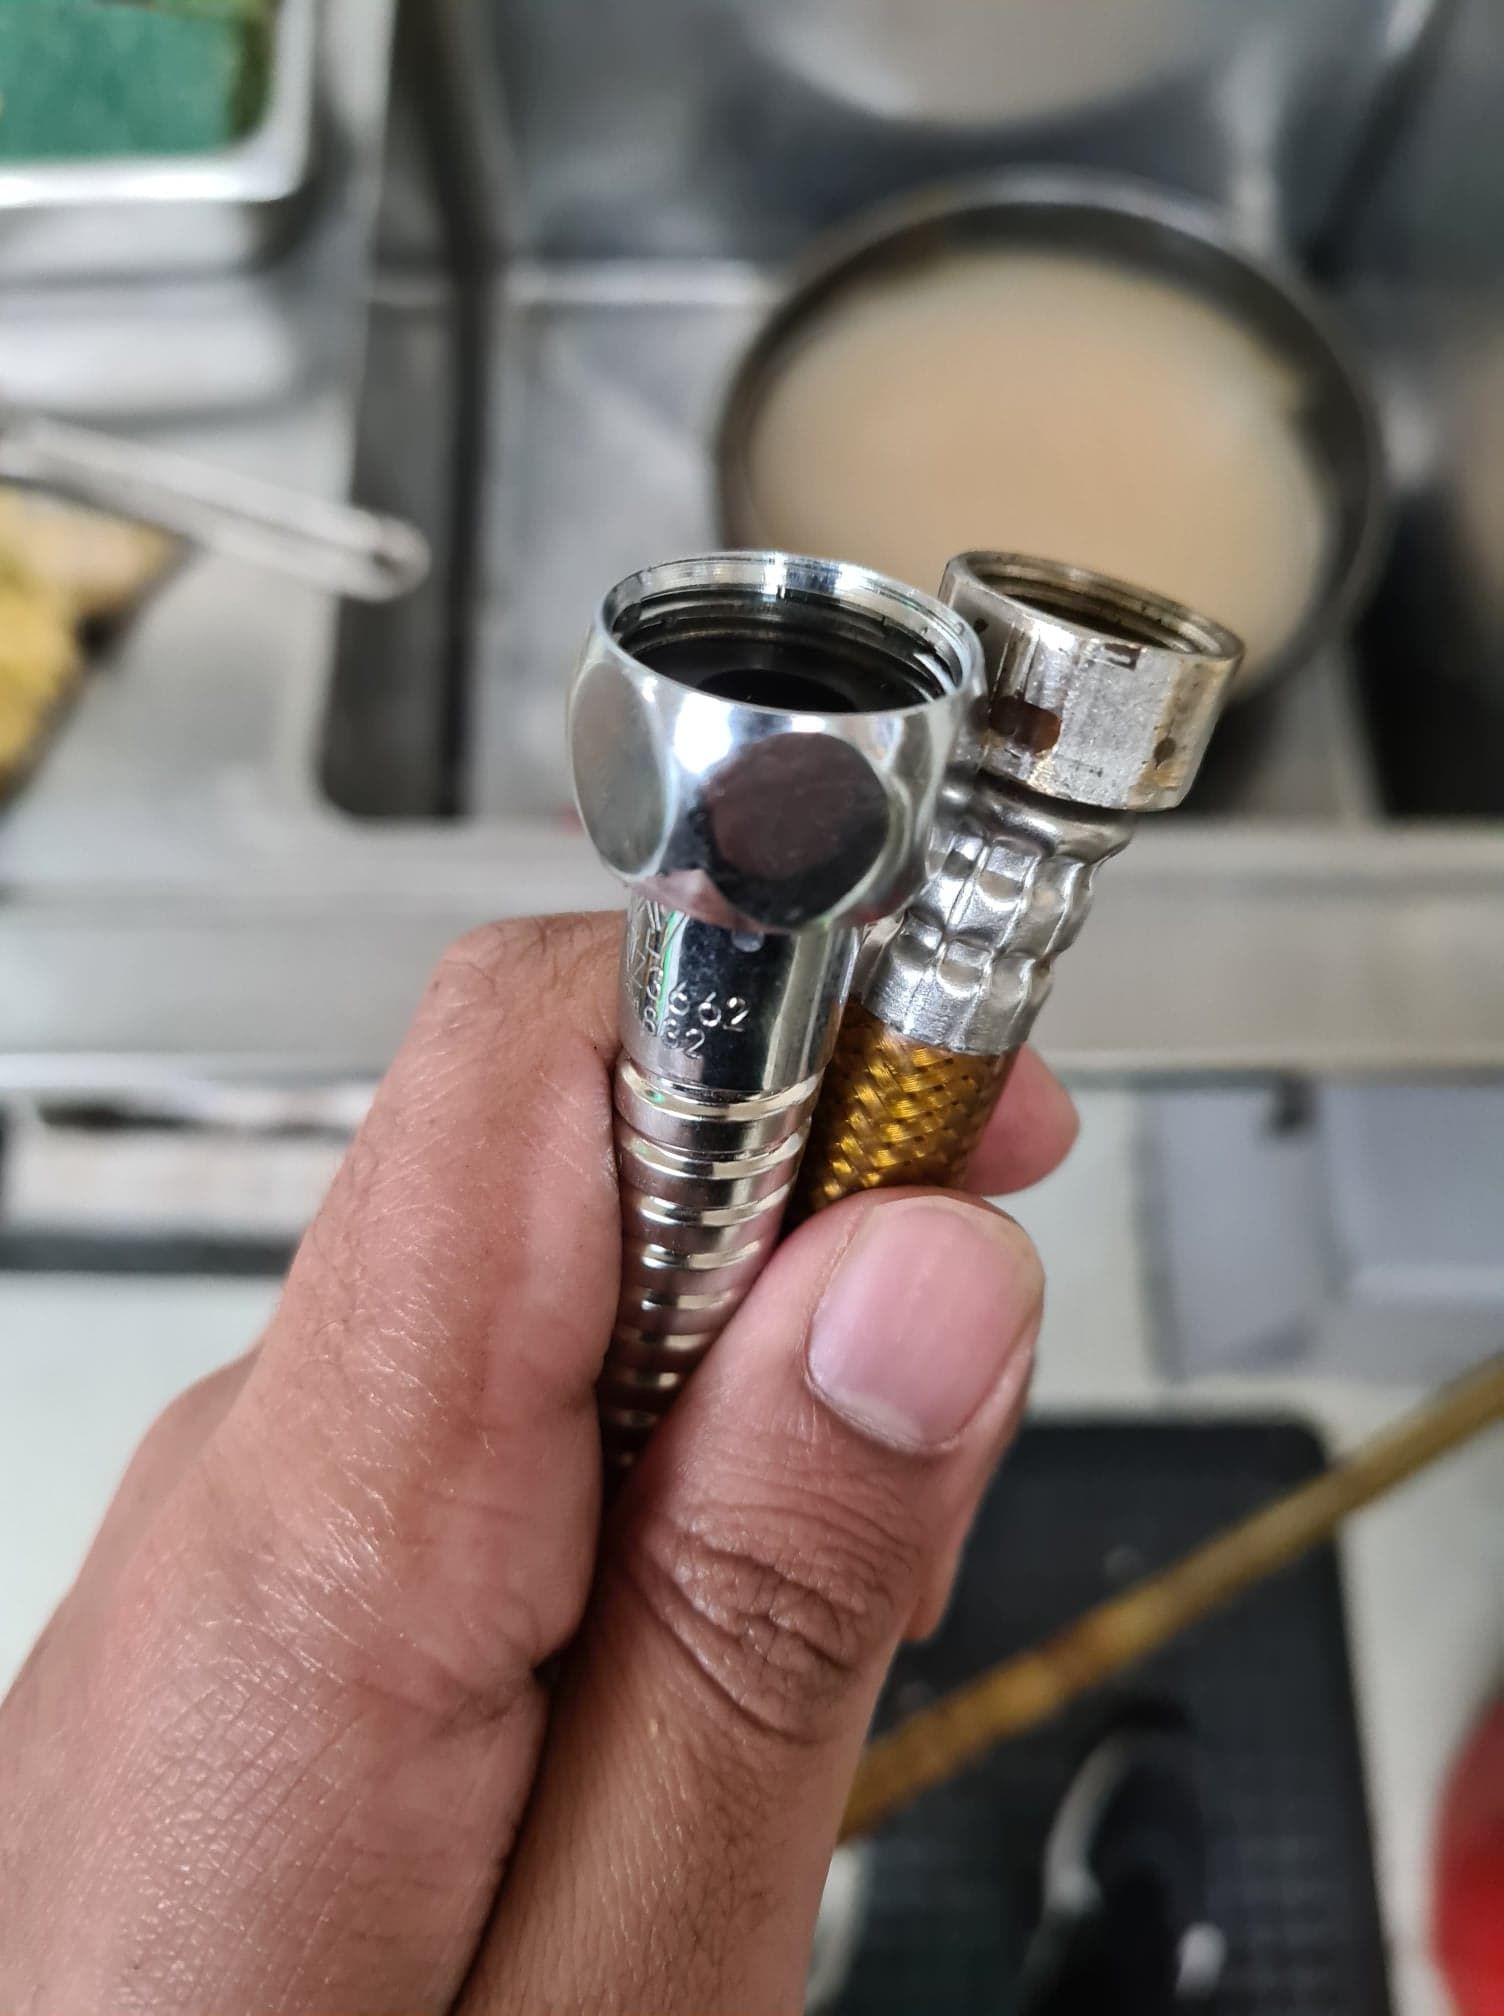 Connecting a Portable Dishwasher to a Pull-Down Faucet Hose